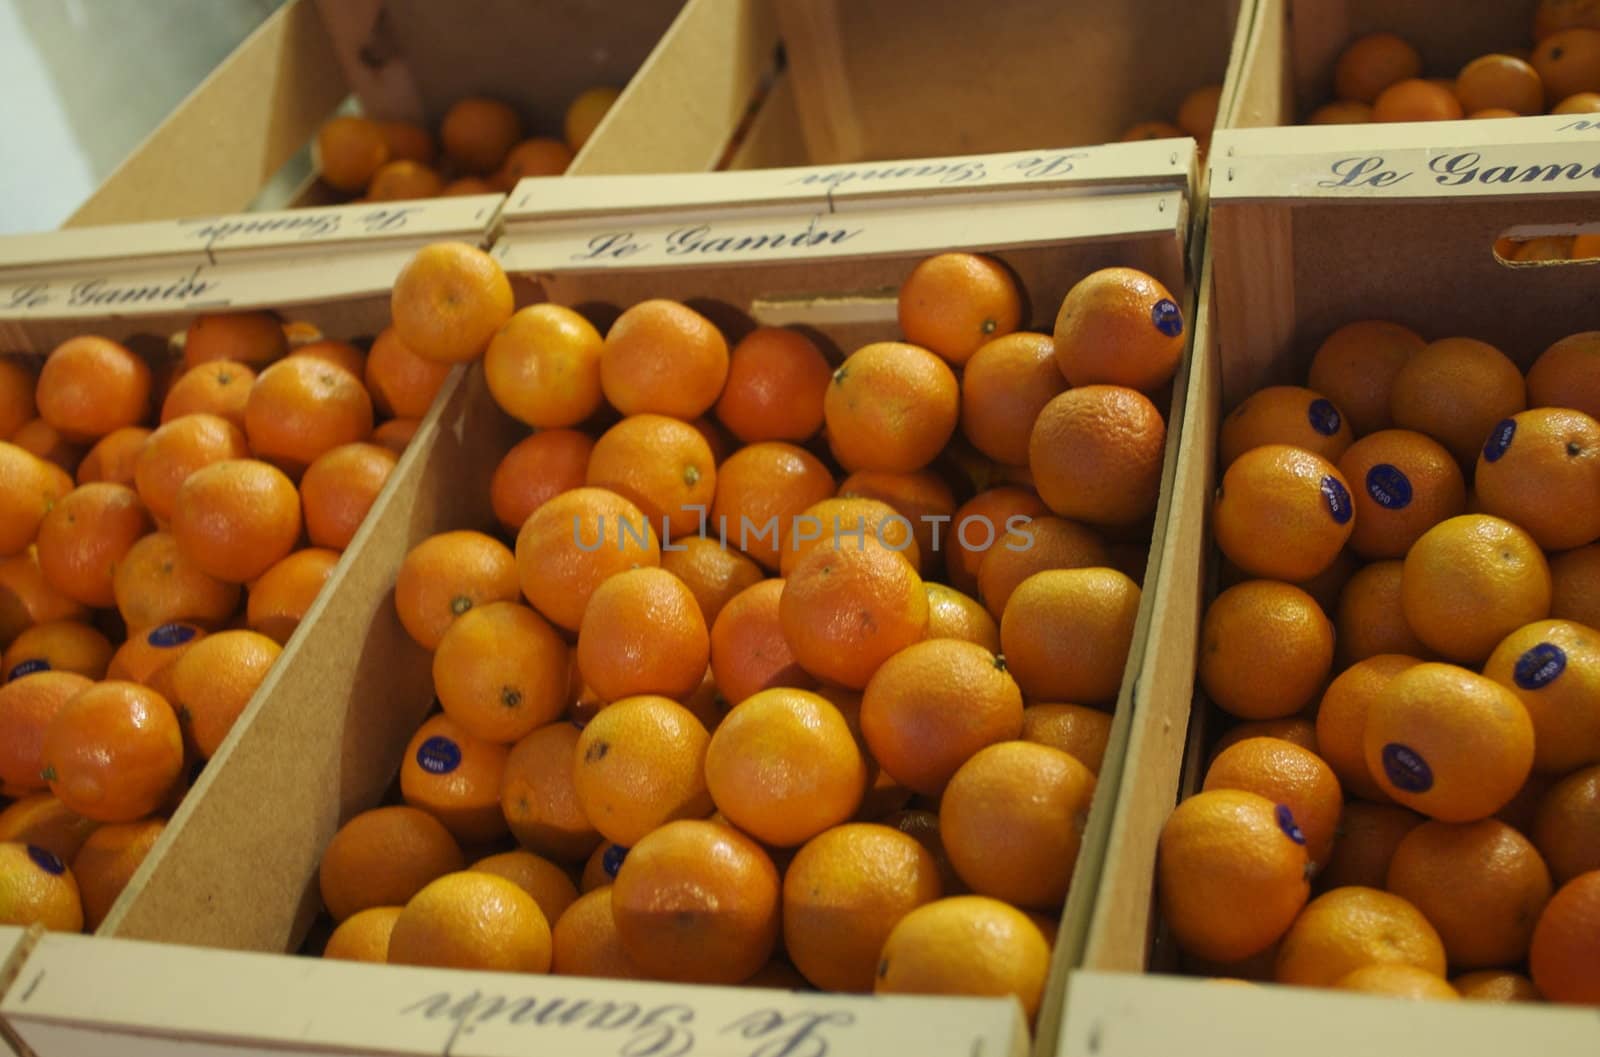 Boxes of oranges outside a French greengrocers